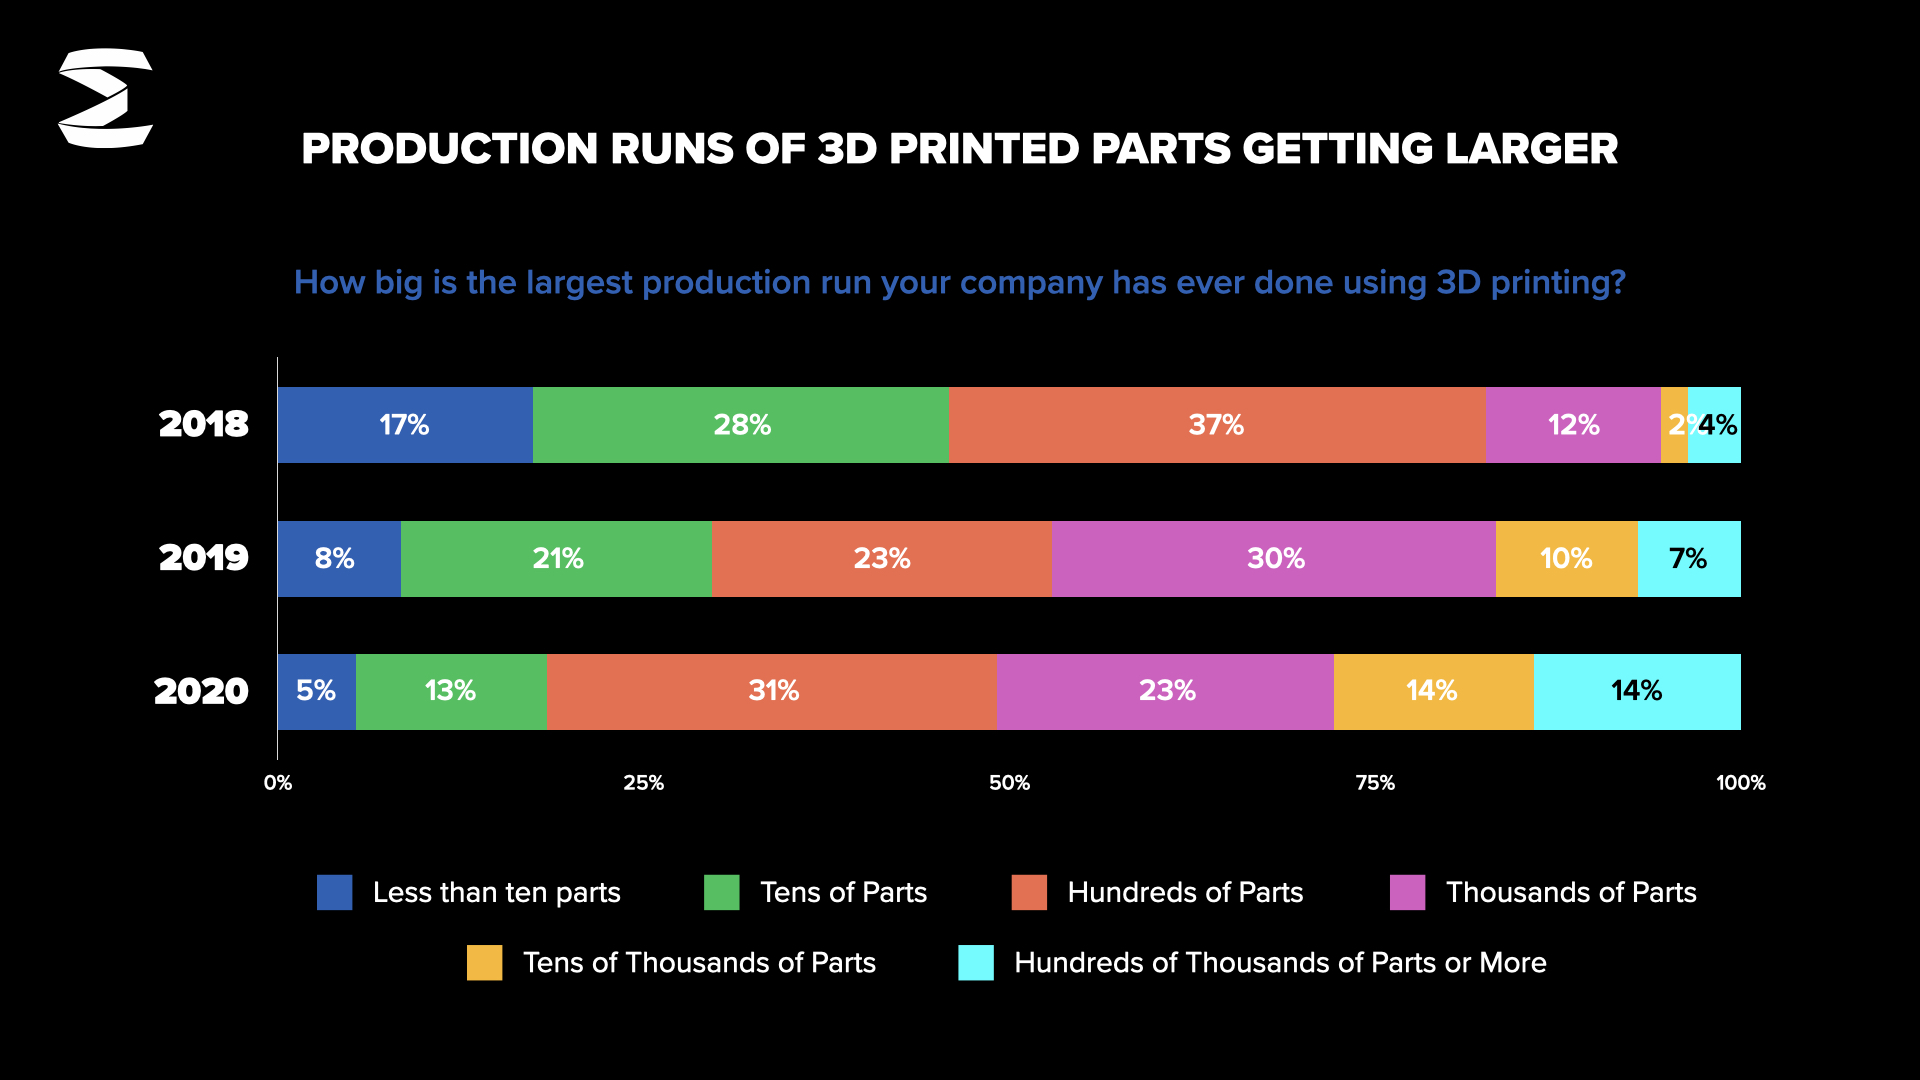 The survey found that 57% of manufacturers increased 3D printing for production parts.